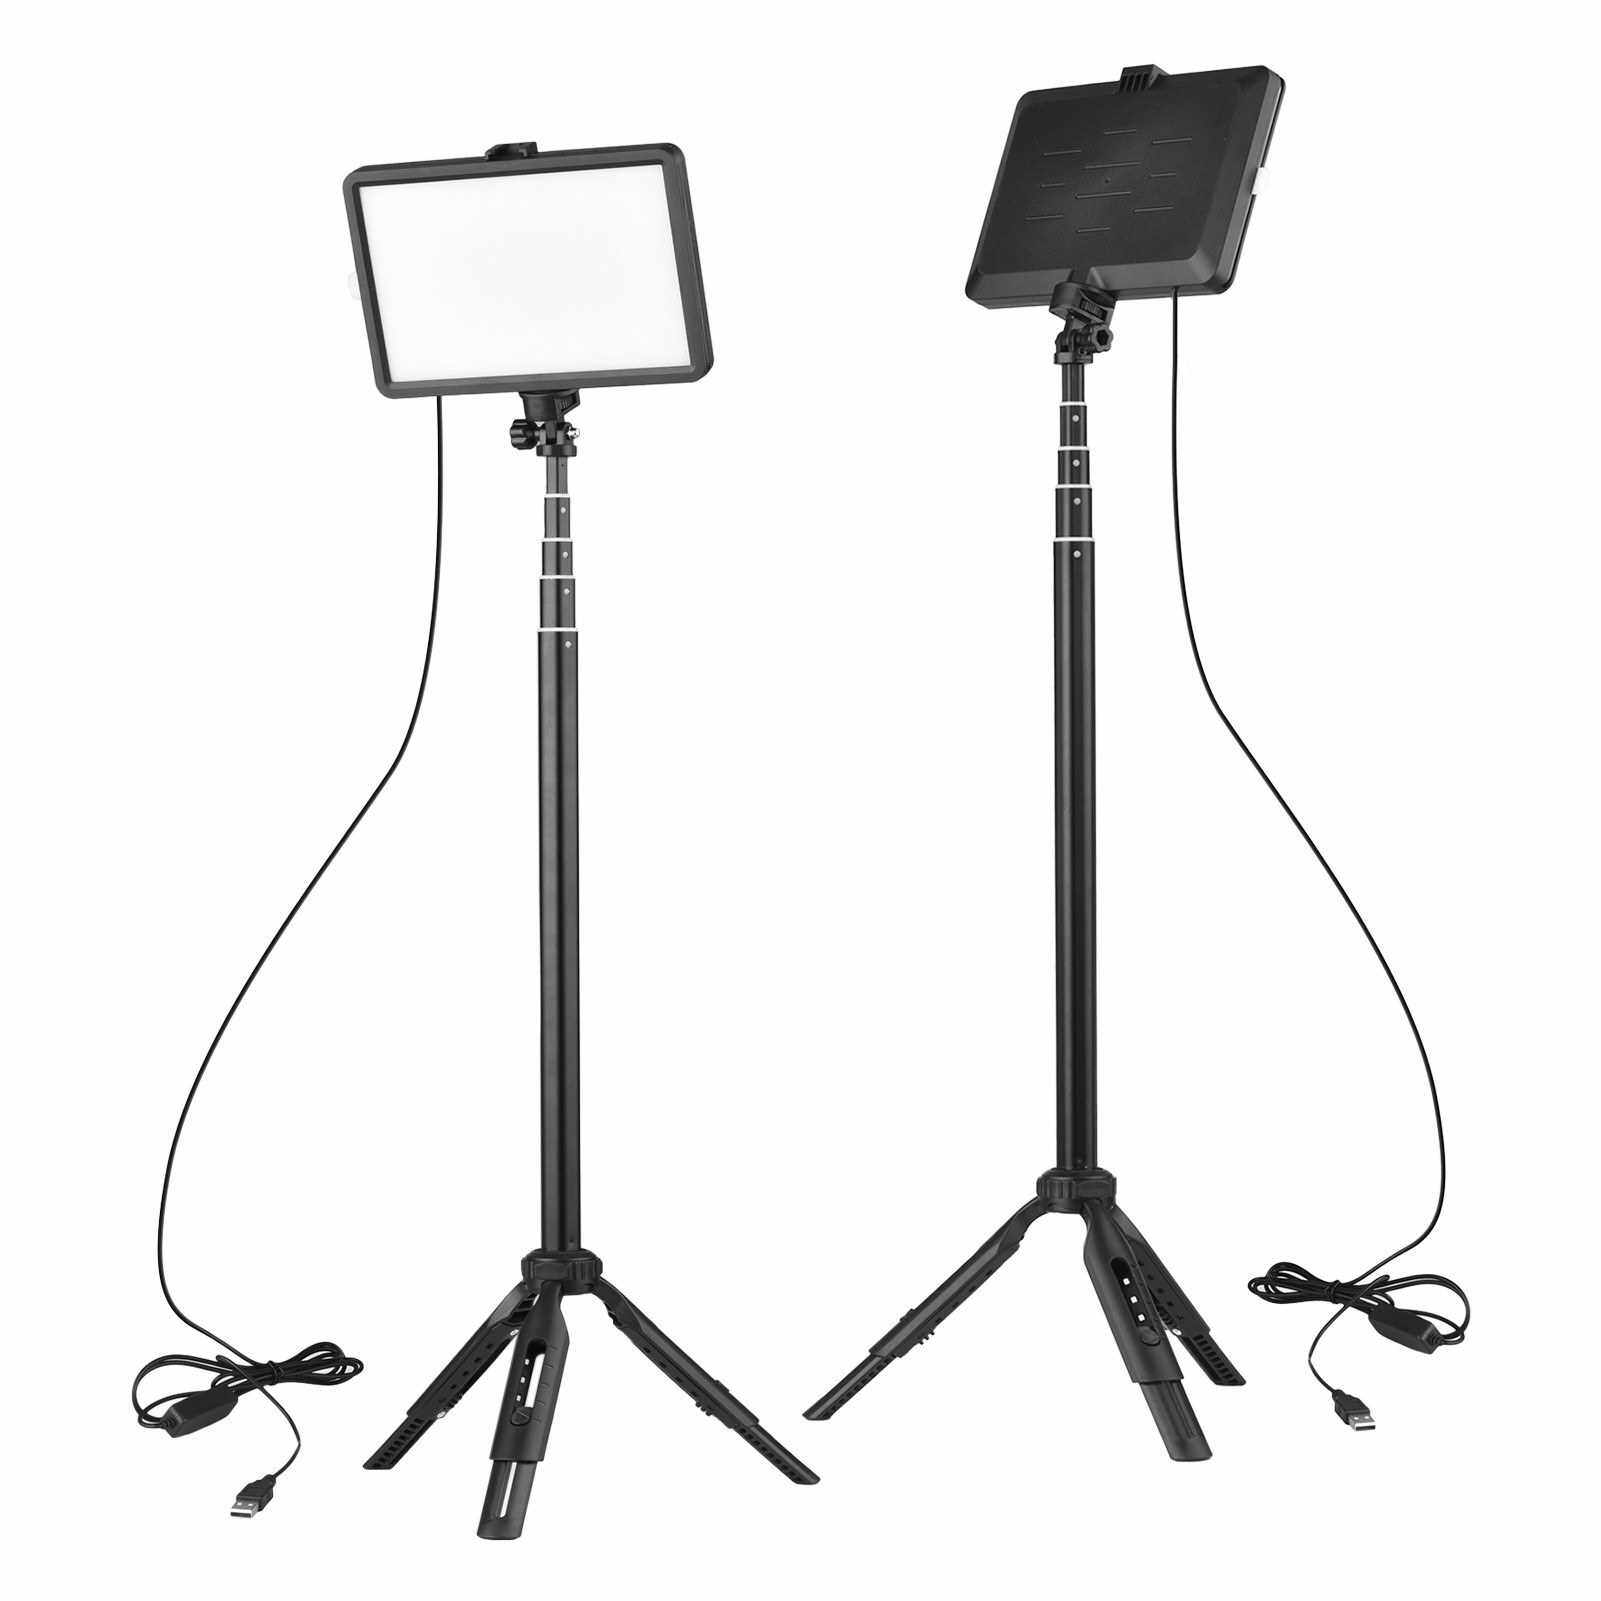 Andoer Portable RGB Video Light Kit with 2 * LED Video Light 7 Colors Lighting 3200K-5600K 10 Levels Brightness USB Powered + 2 * Extendable Tripod Max.148cm/58in Height for Video Conference Live Streaming Online Teaching (Standard)